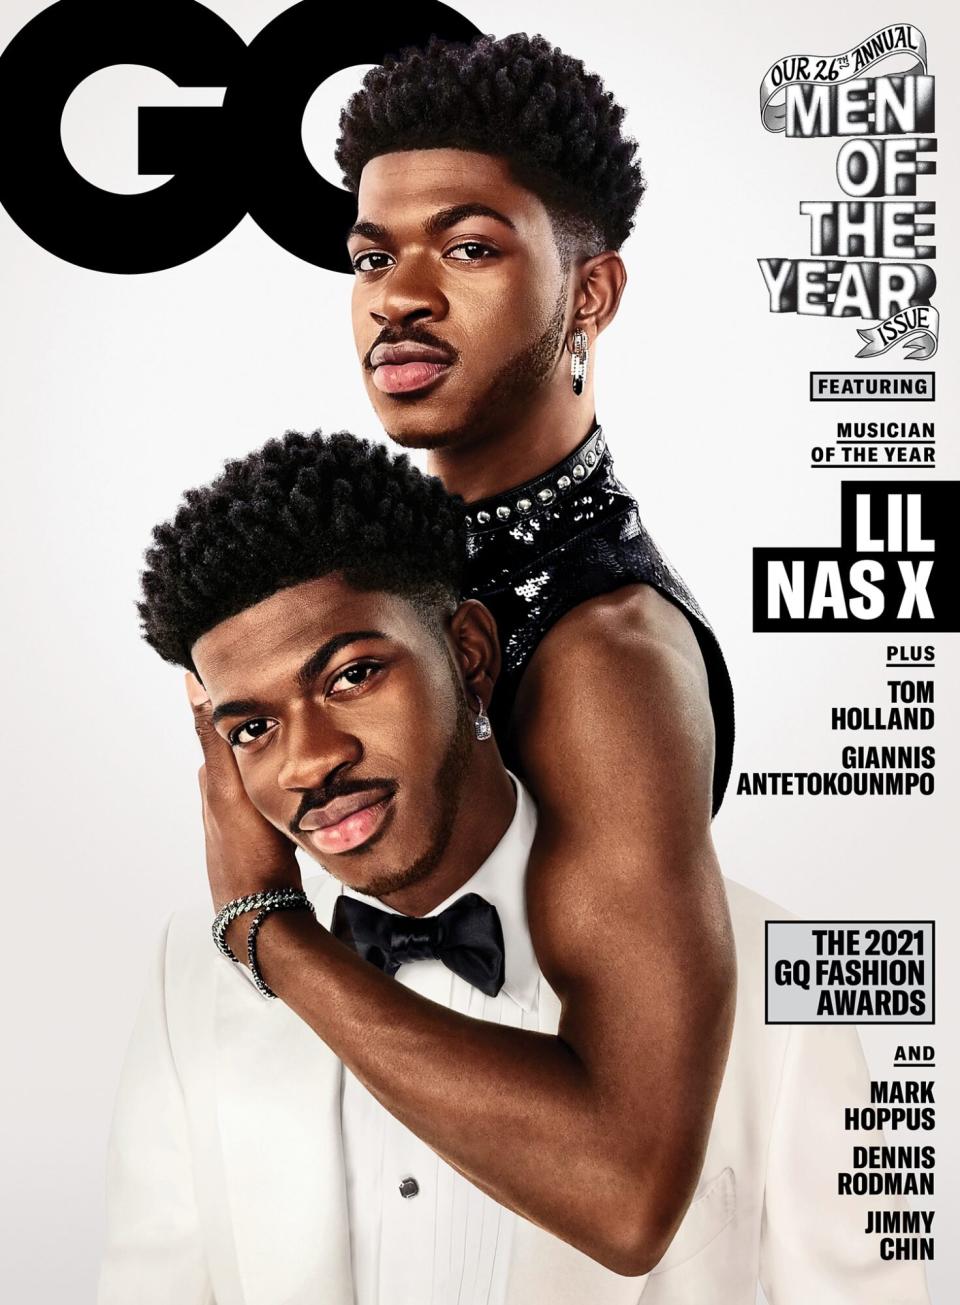 GQ Men of the Year 2021 - Cover - Lil Nas X.jpg